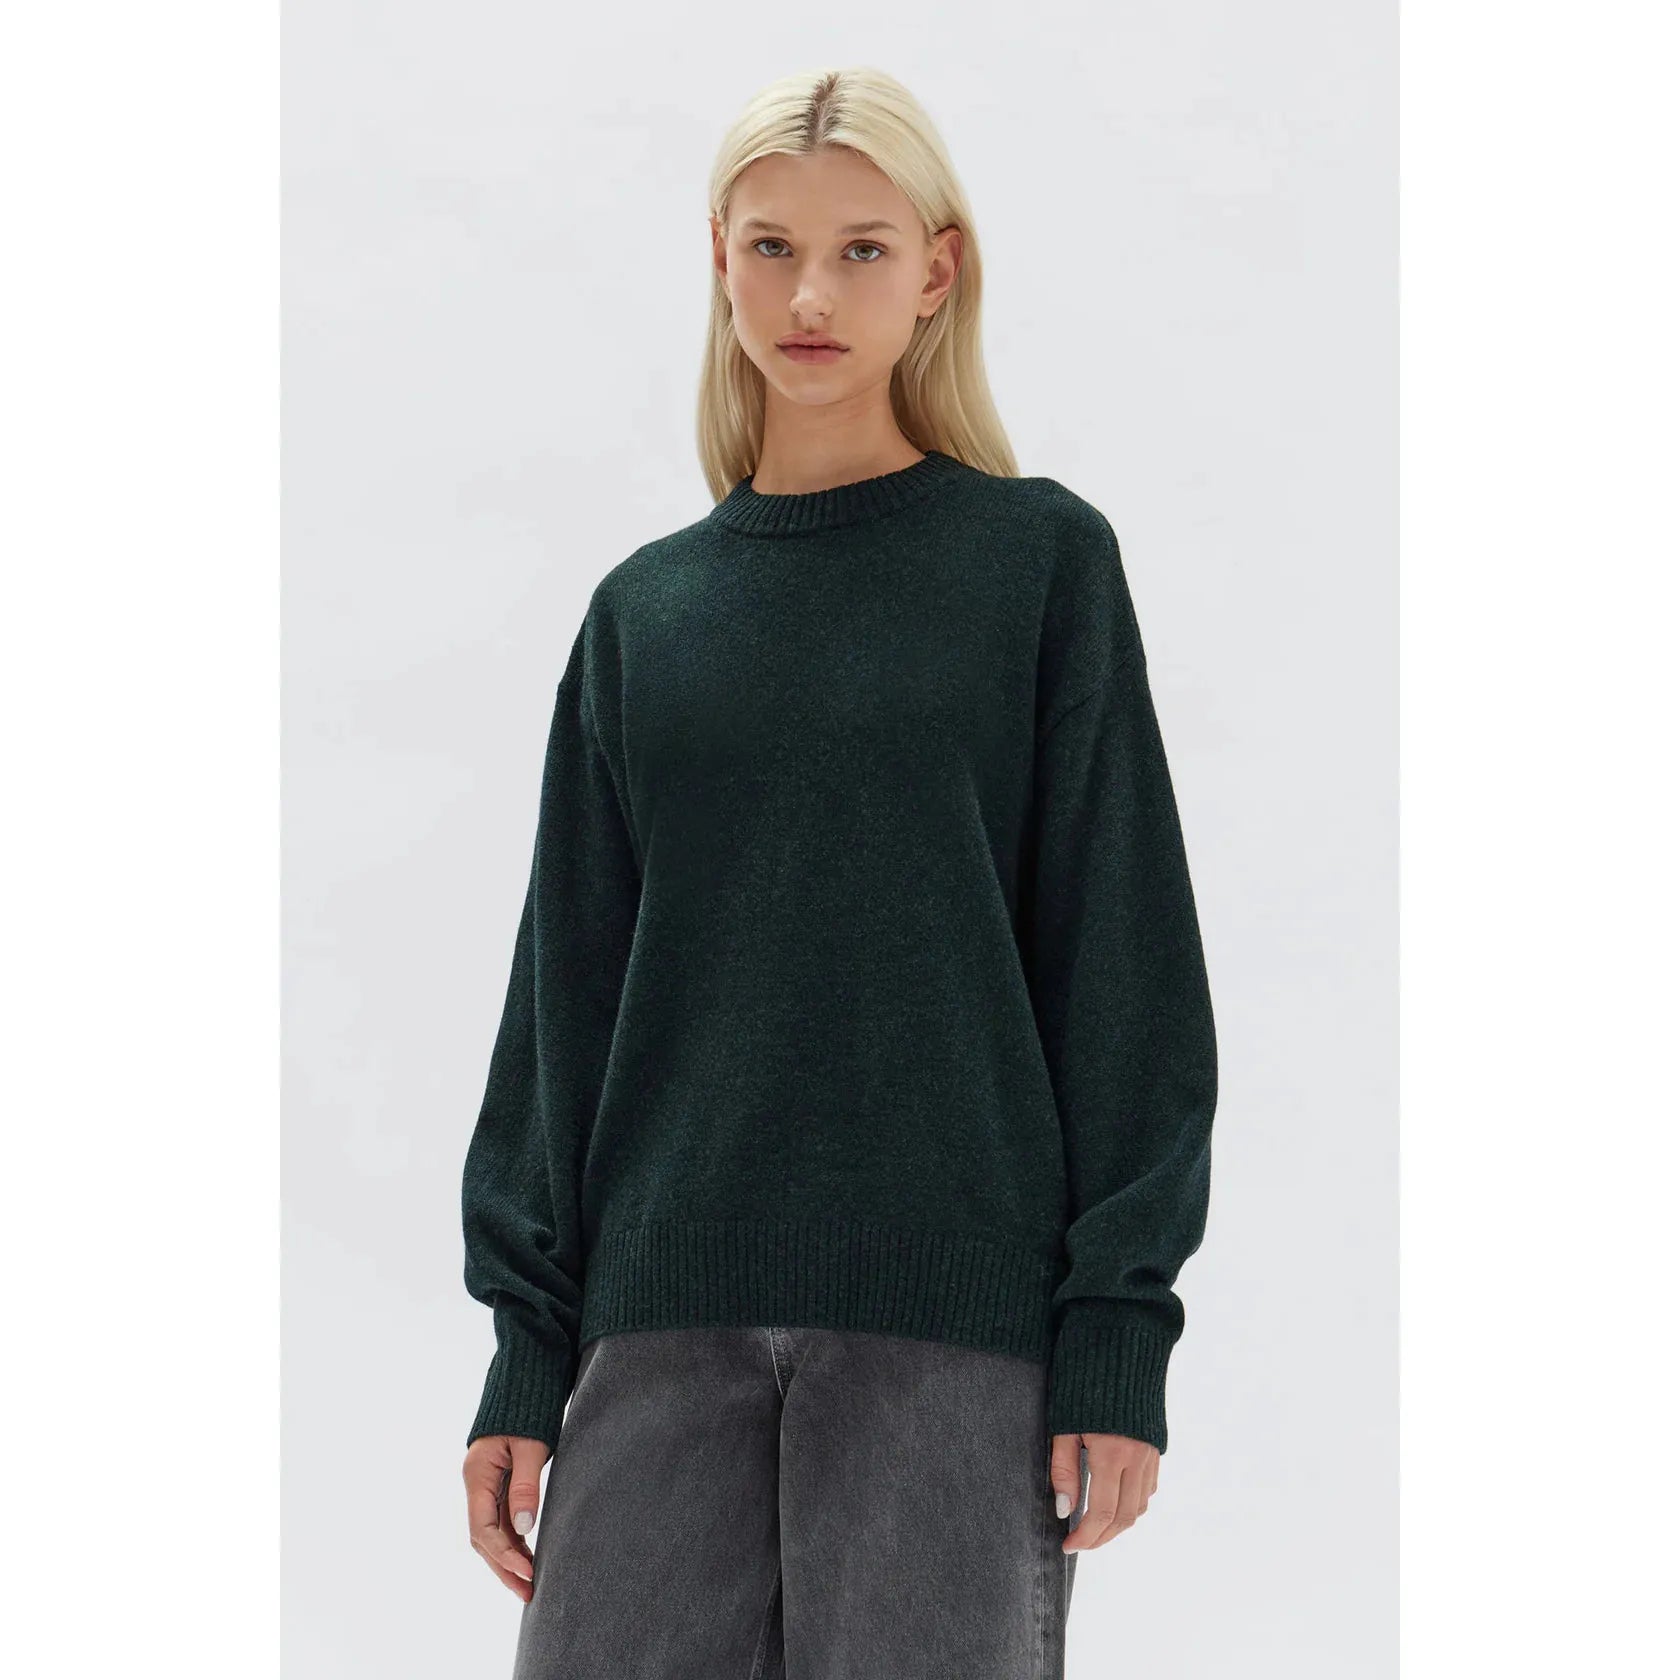 Assembly Label Iris Knit - Forest